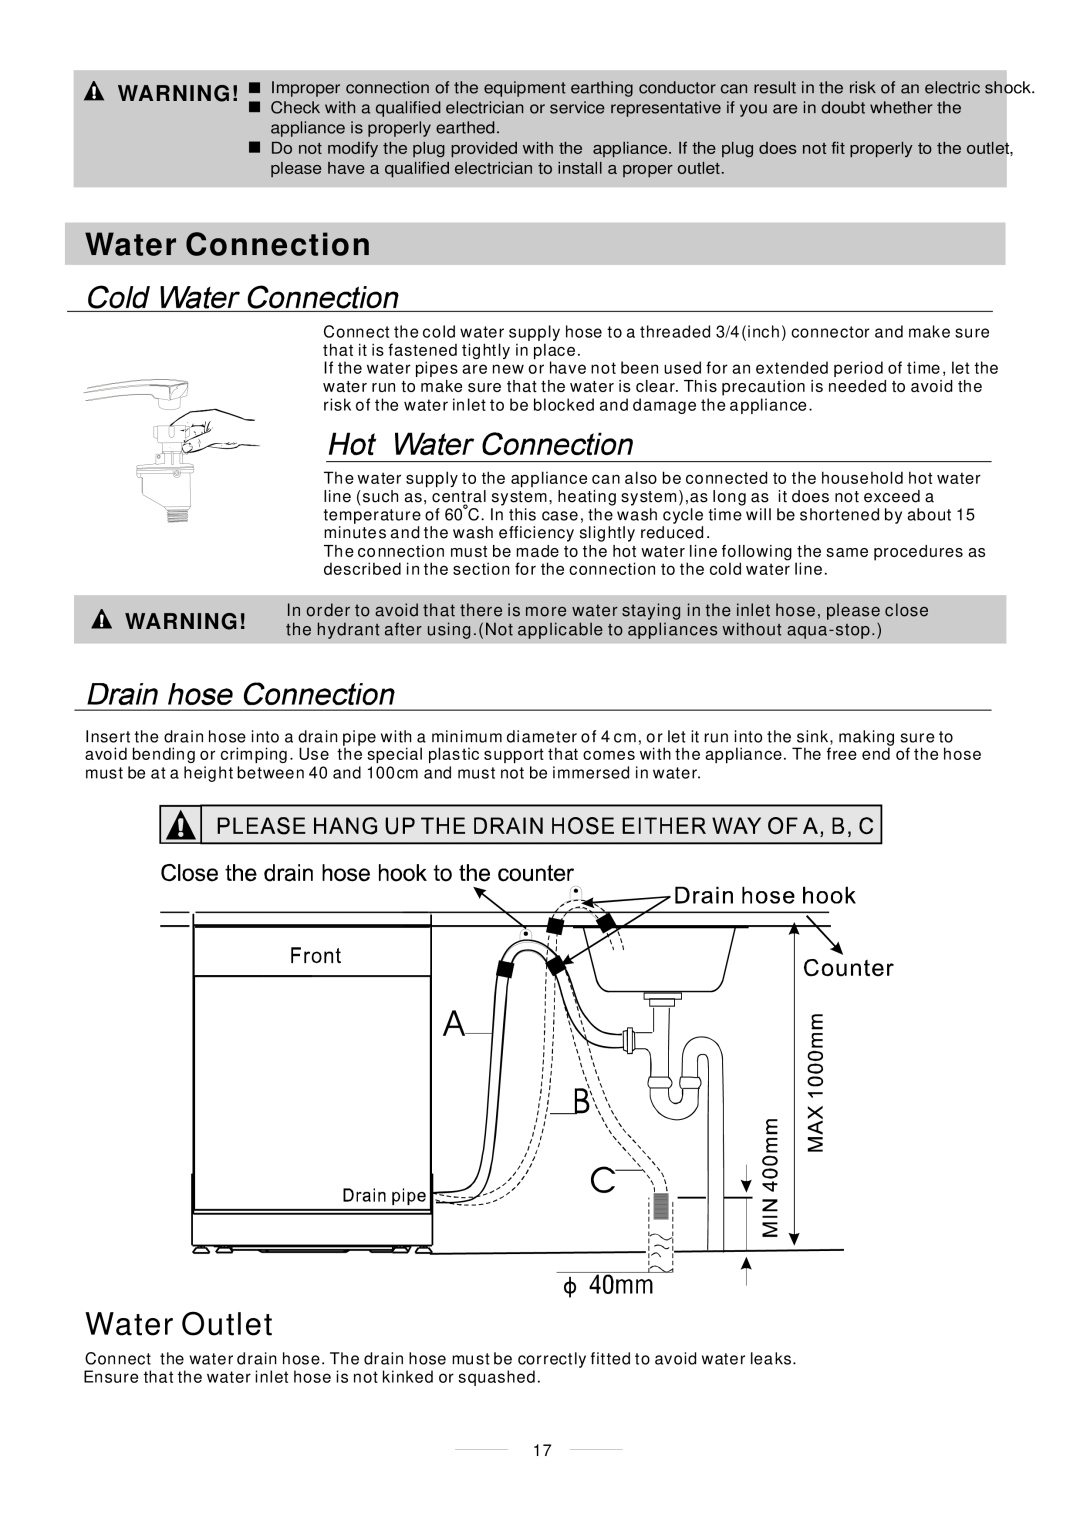 Whirlpool ADP 750 manual Water Connection, Water Outlet, for personal safety 